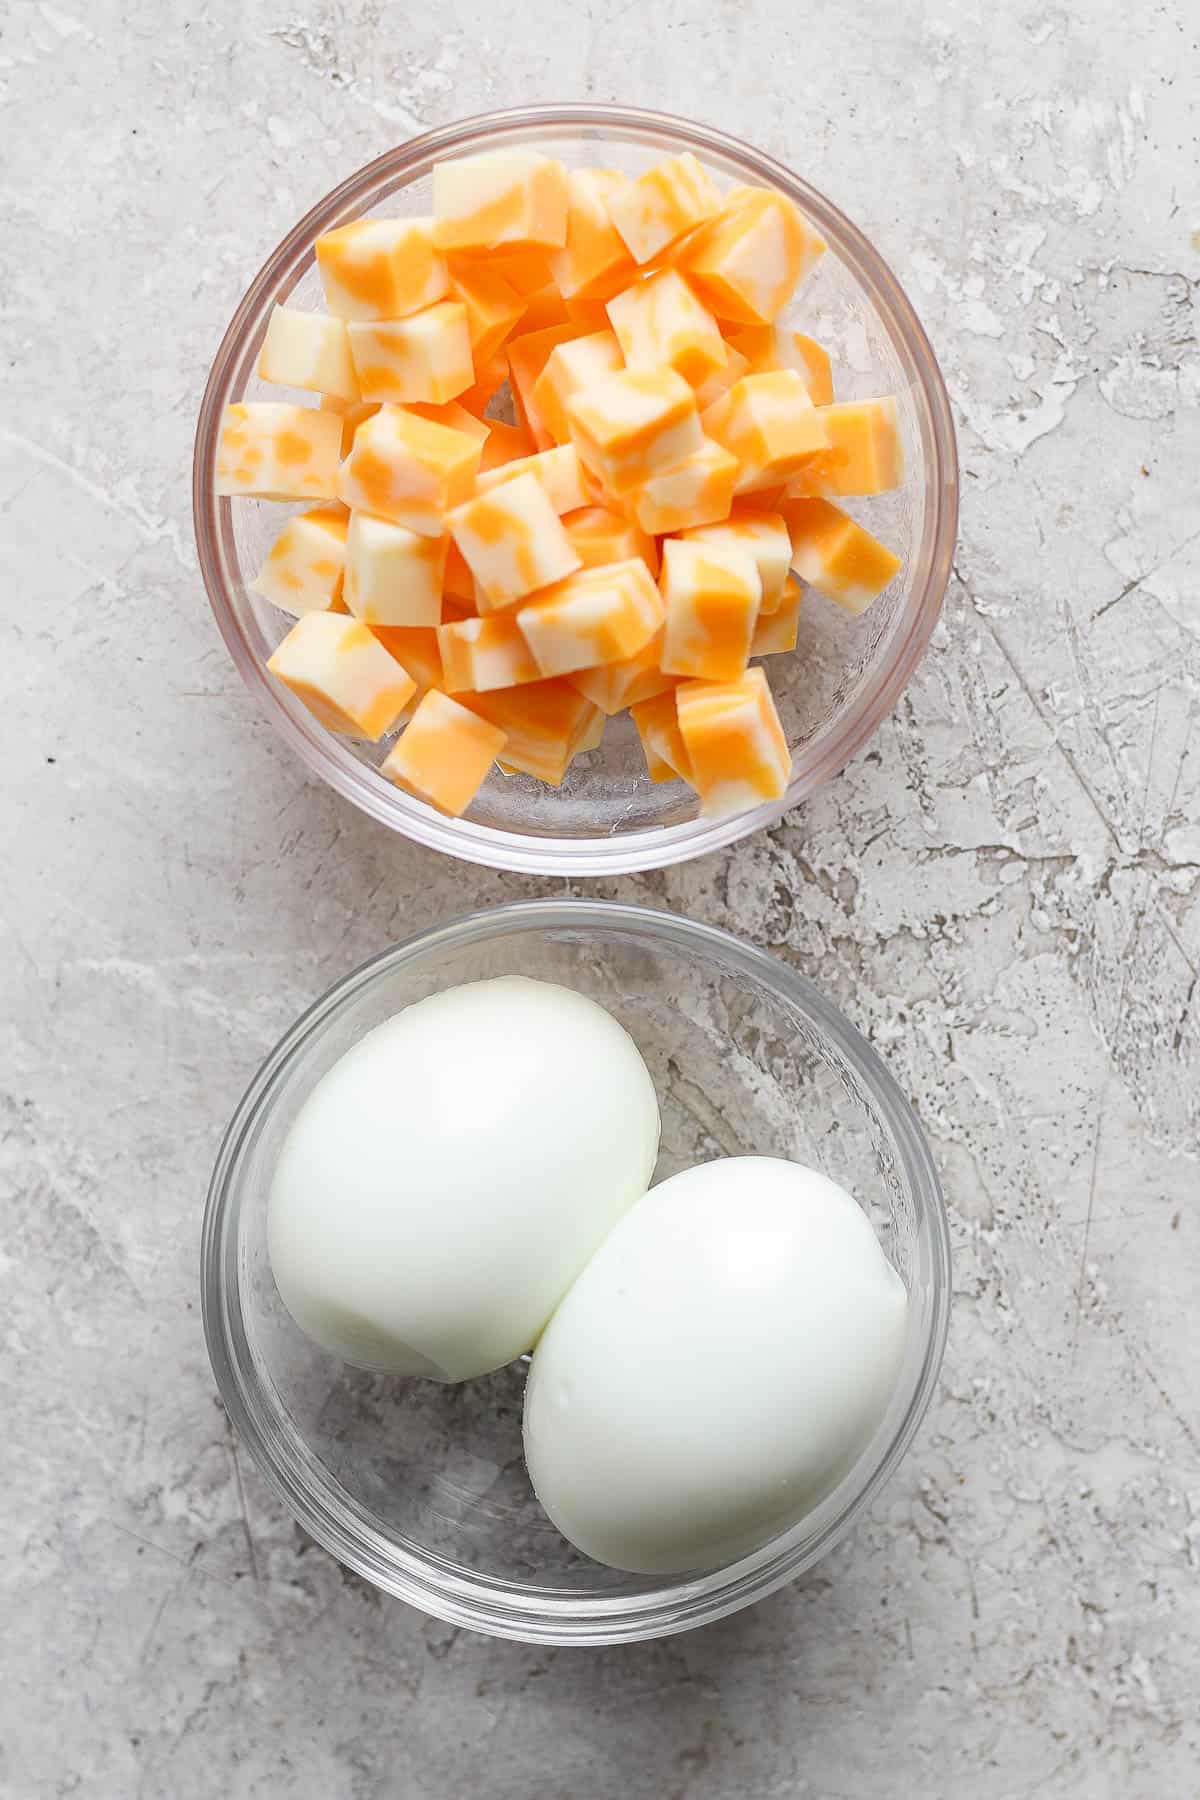 Bowls of cubed cheese and hard boiled eggs.